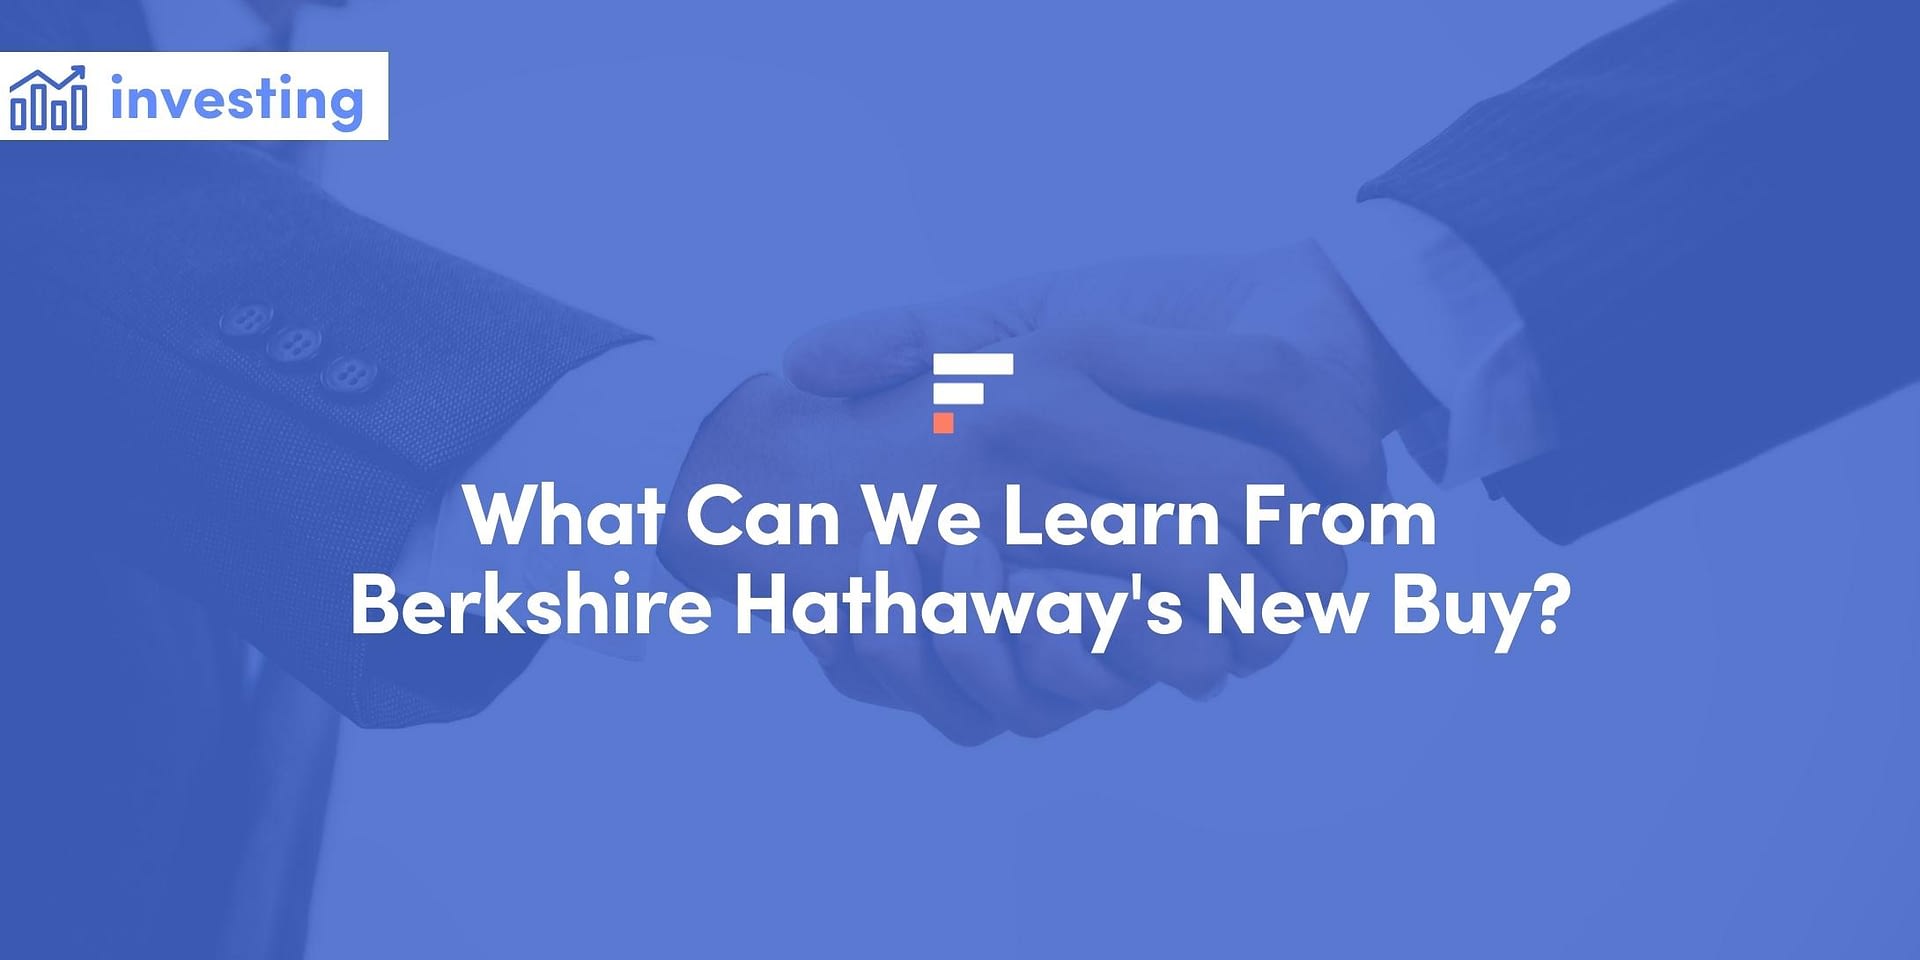 What Can We Learn From Berkshire Hathaway’s New Buy? LaptrinhX / News